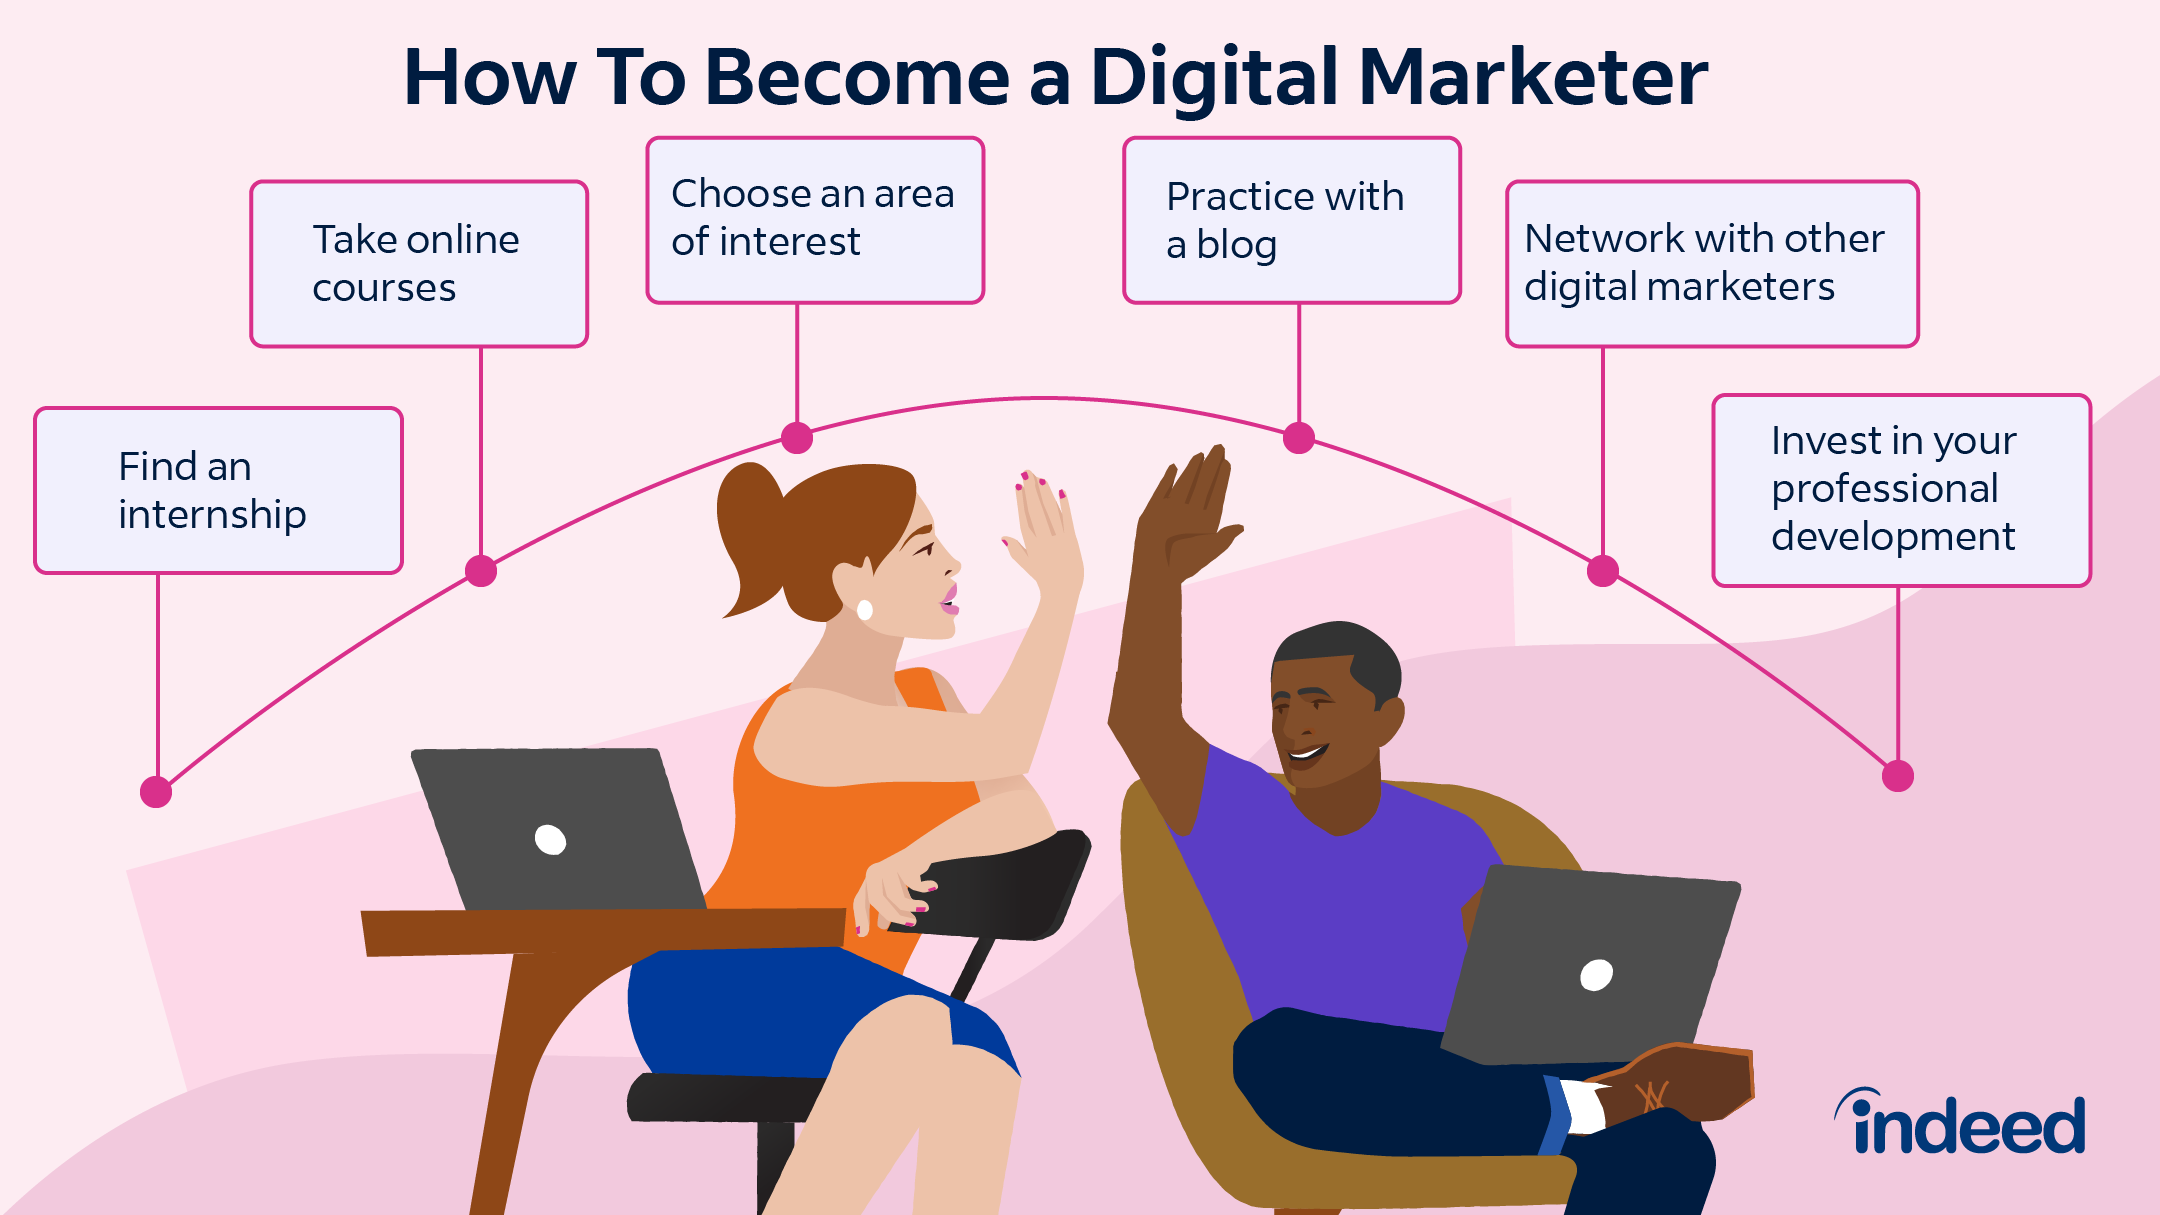 How Does a Digital Marketer Get Paid